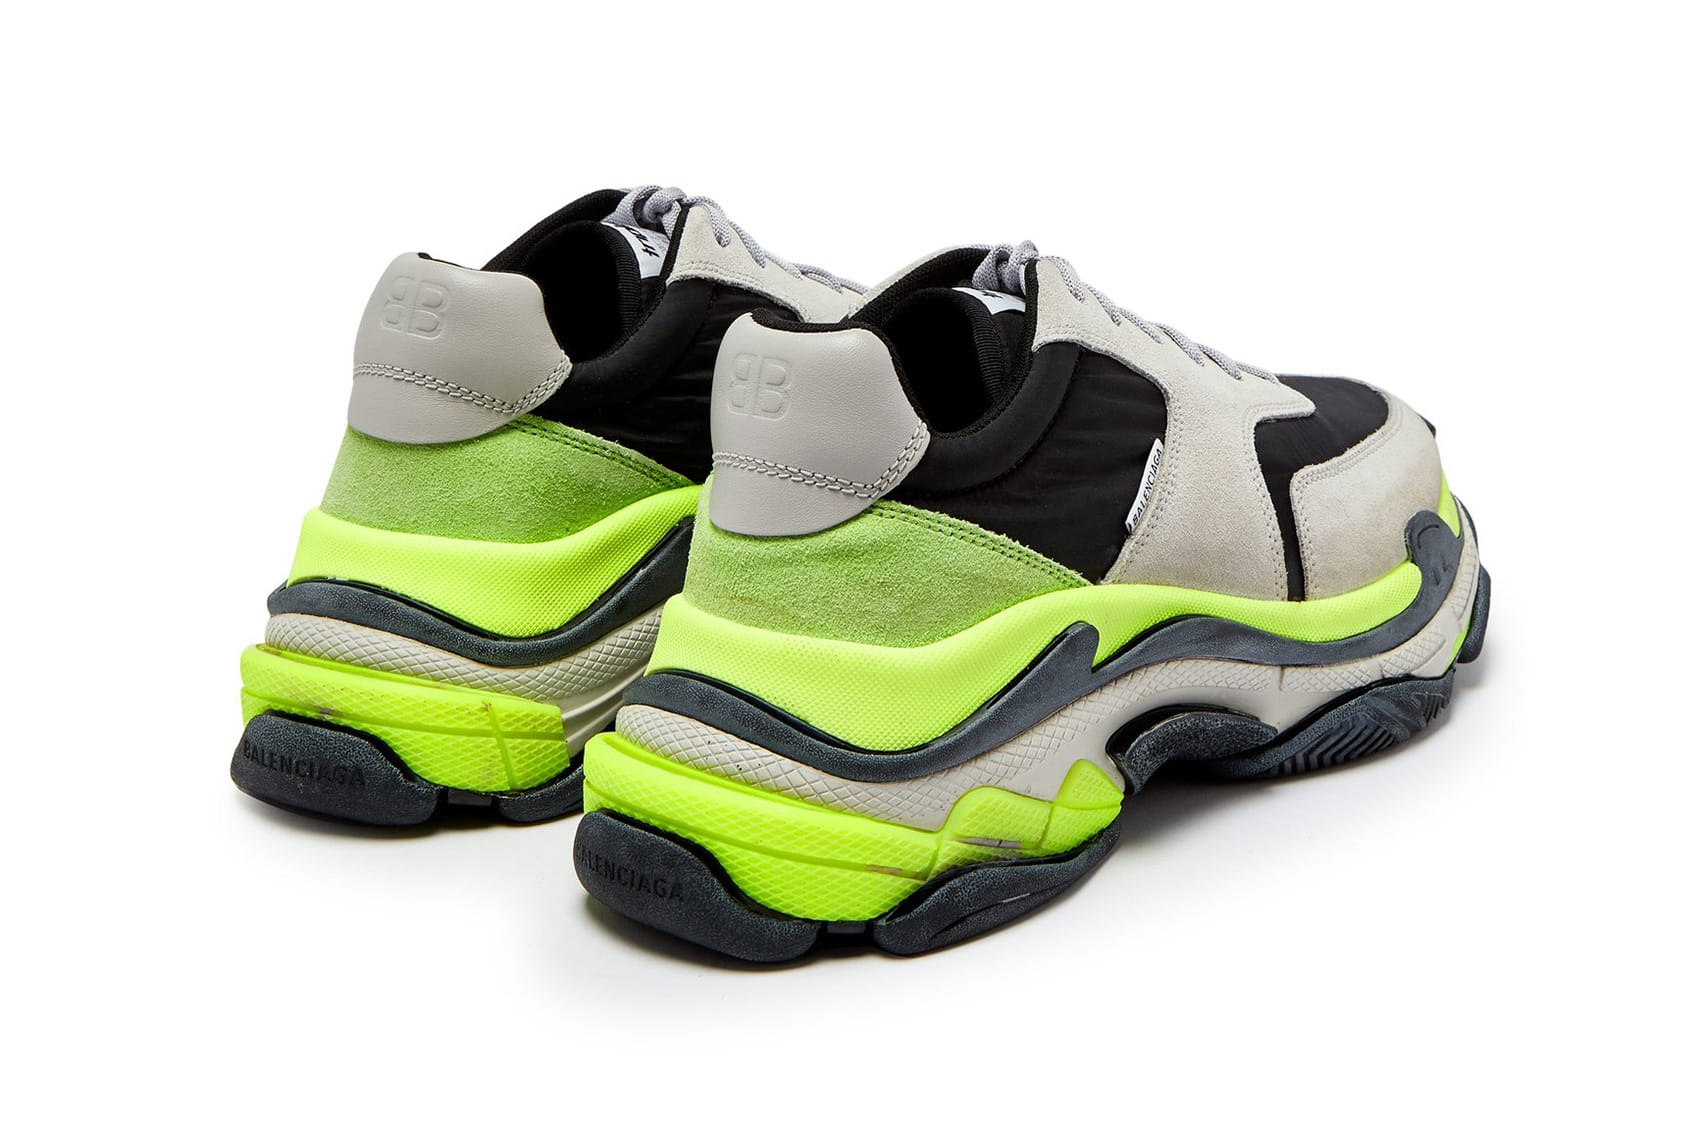 Balenciaga s Triple S Express Rolls On in Navy and